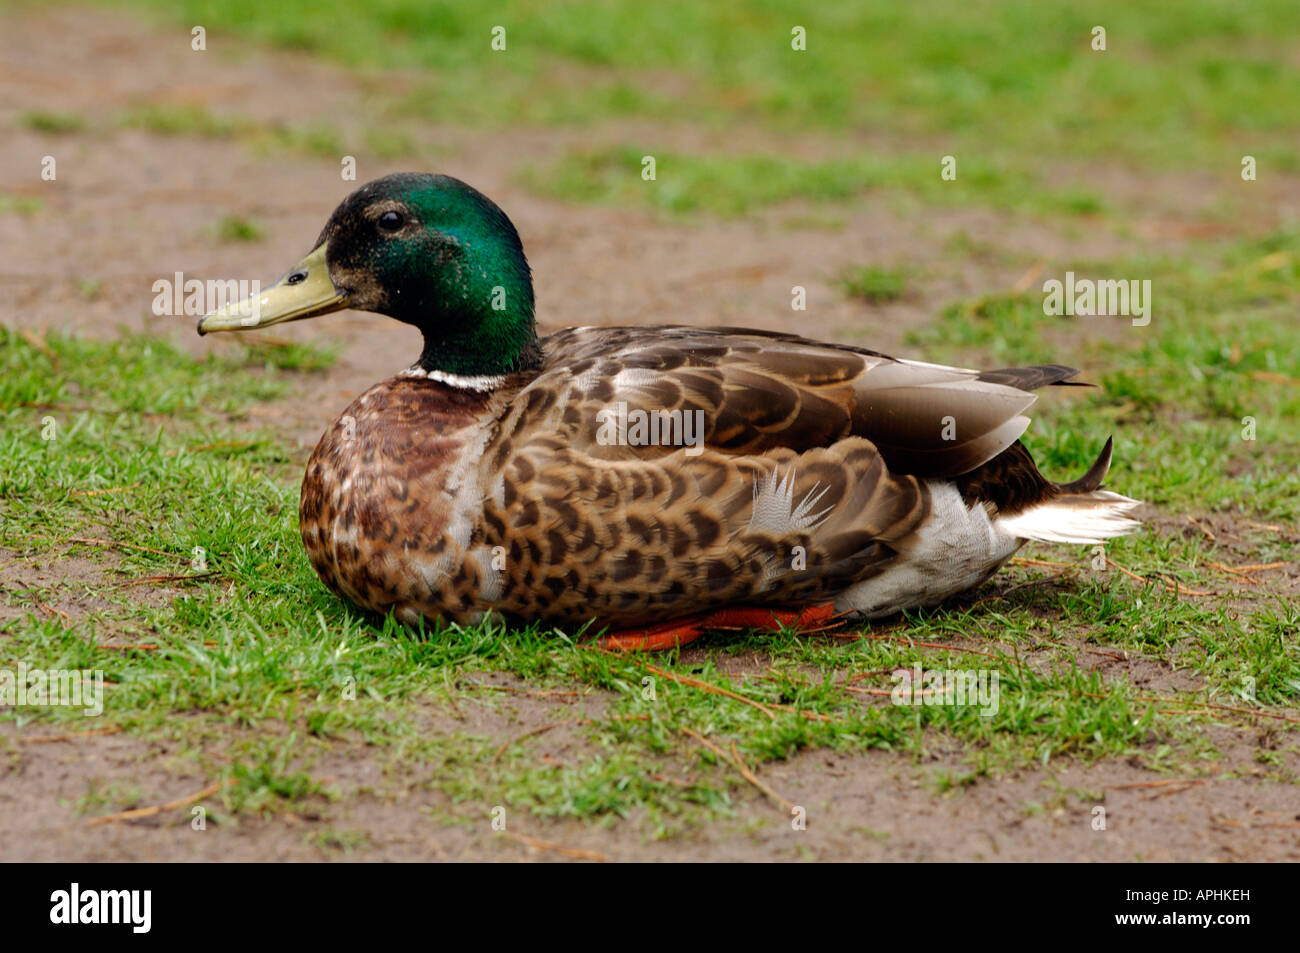 some ducks or mallards sitting or trying to walk on a frozen pond or lake Stock Photo